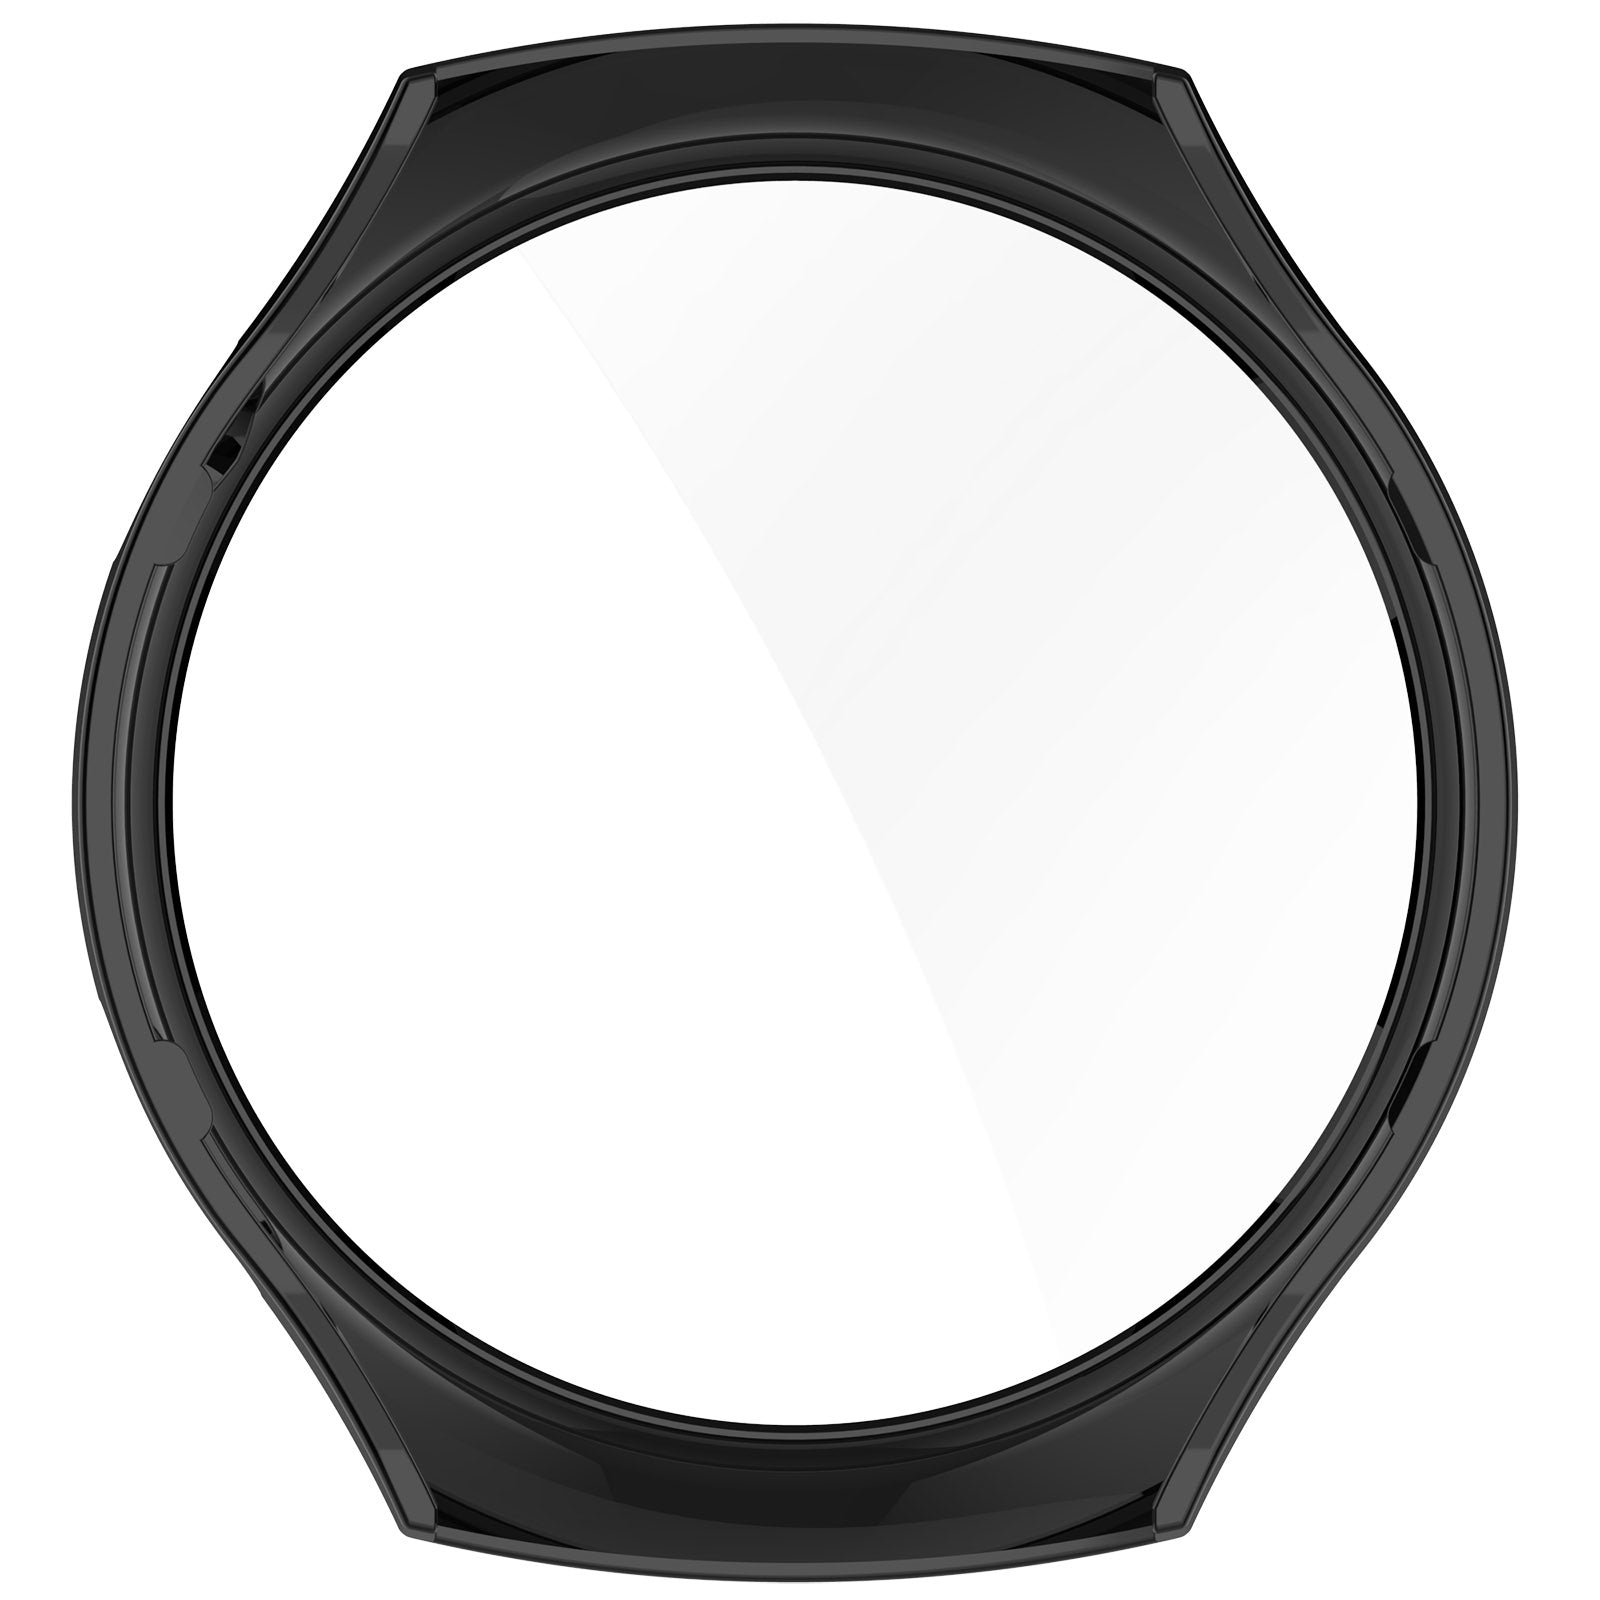 For Huawei Watch 4 Pro Case PC Cover with Curved Tempered Glass Screen Protector - Black